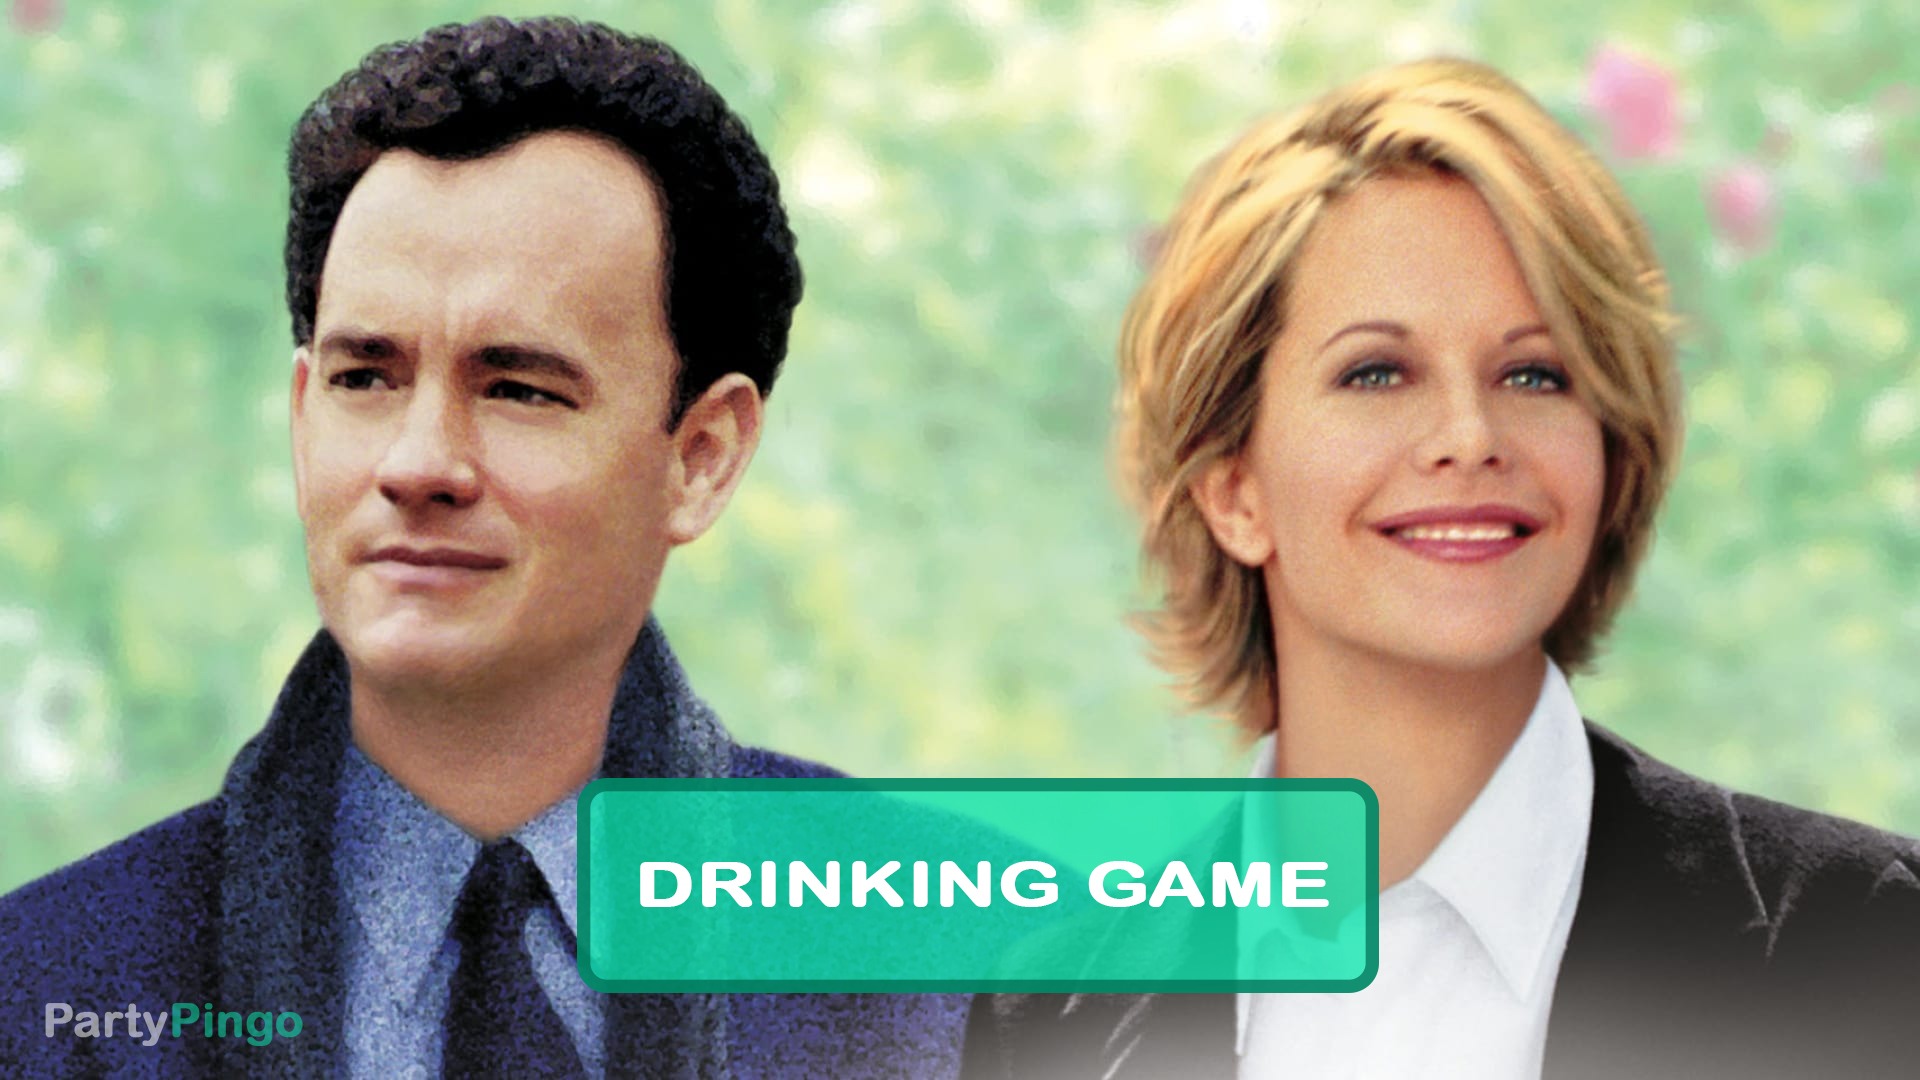 You've Got Mail Drinking Game